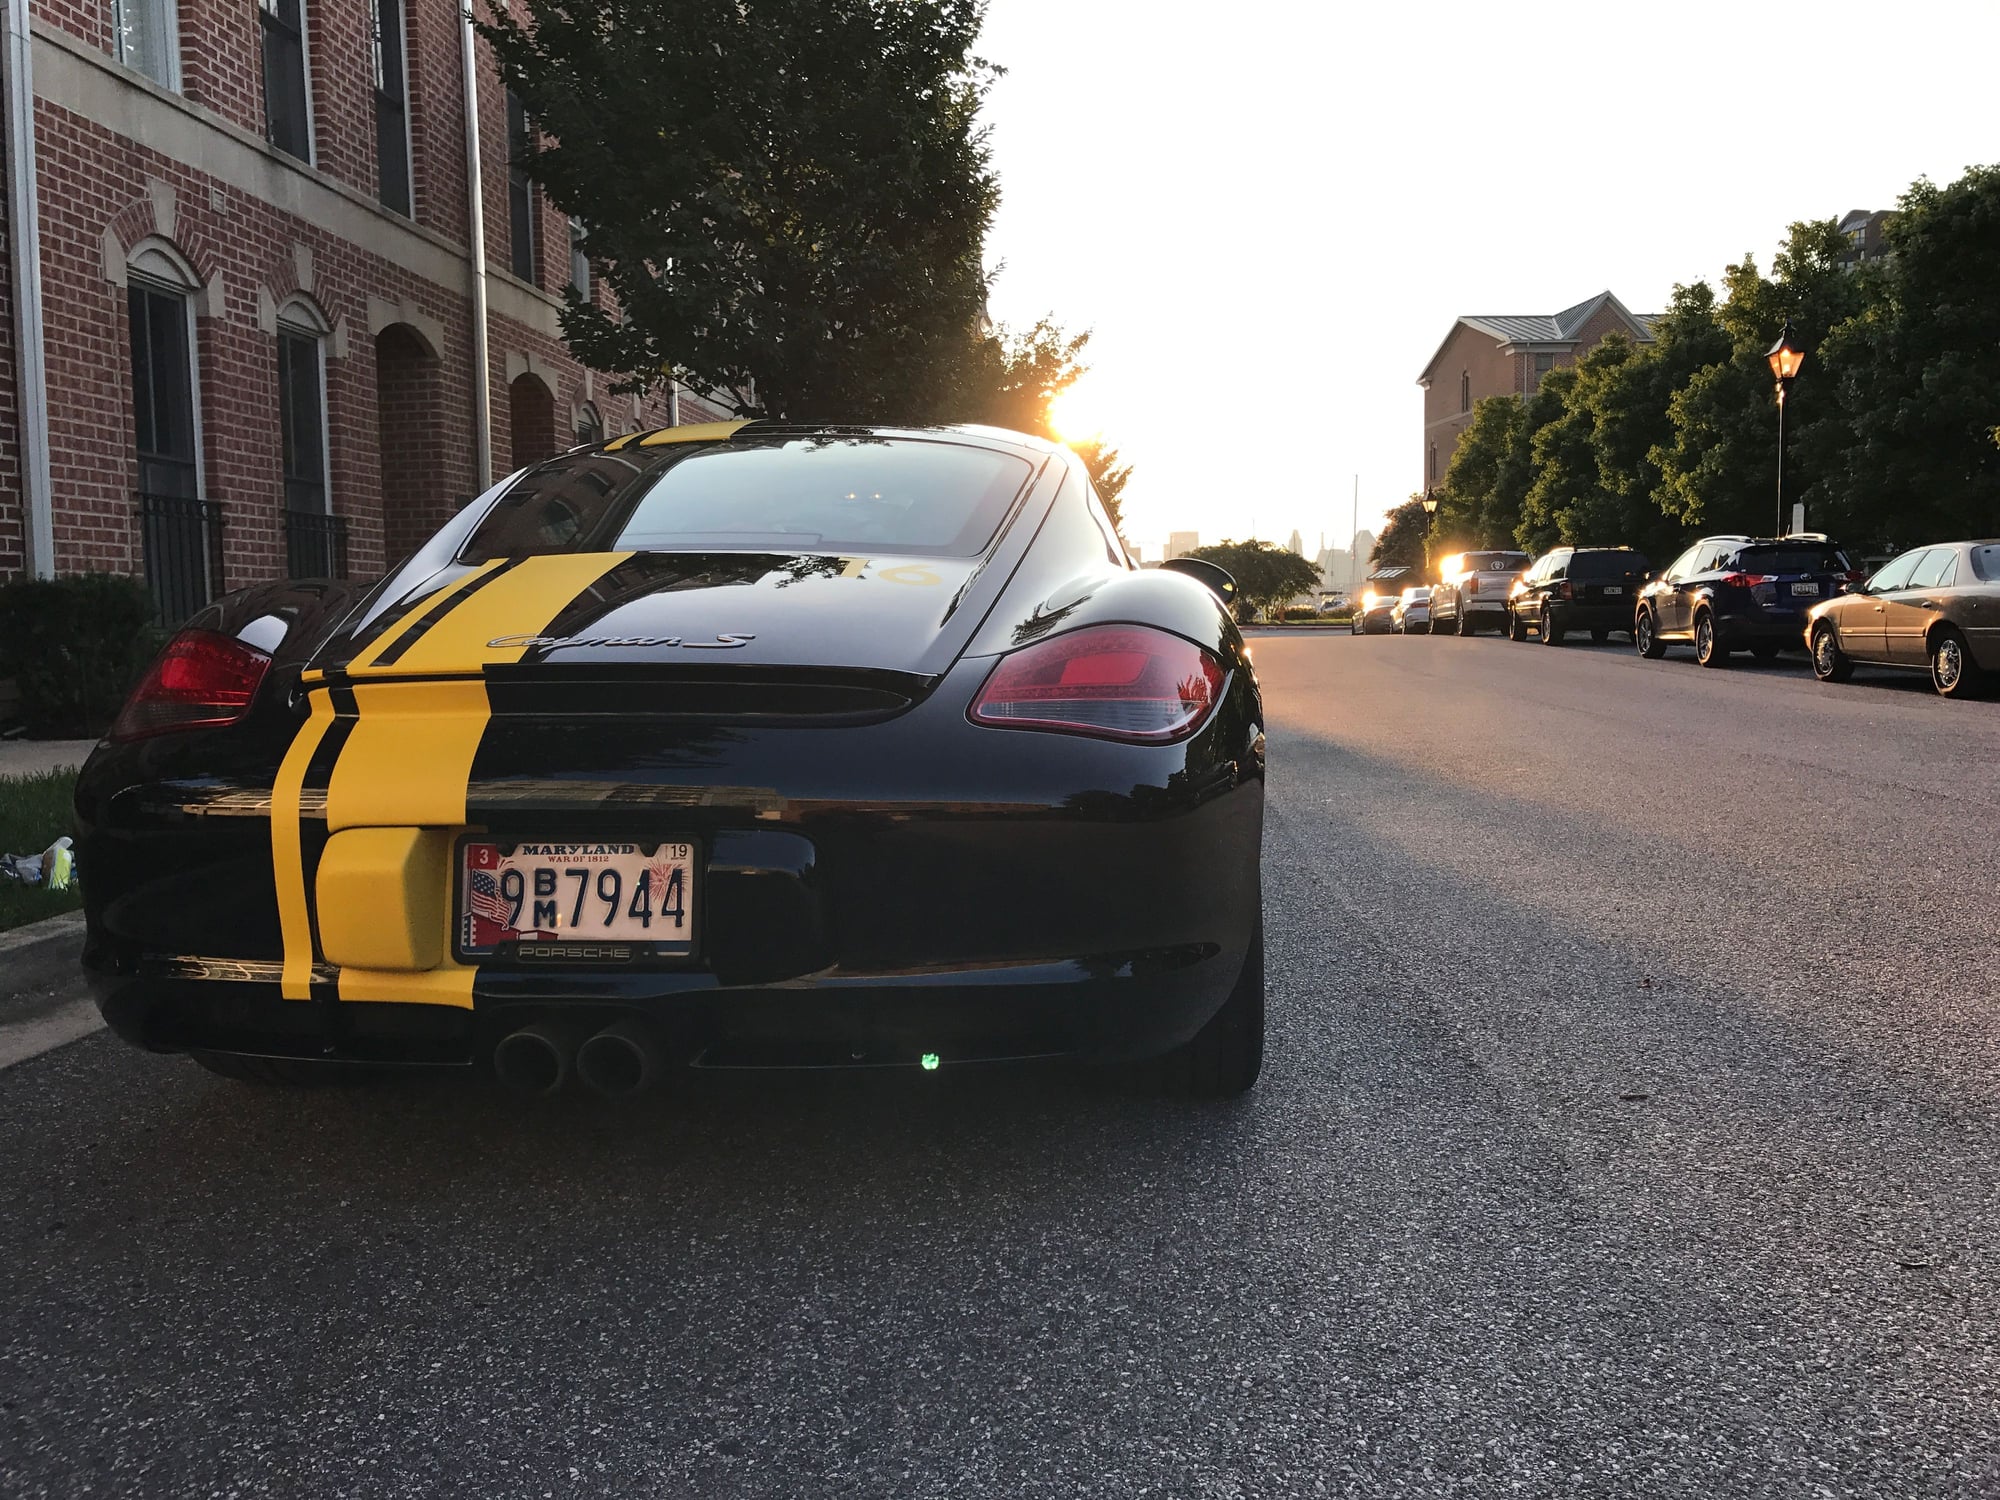 2010 Porsche Cayman - 2010 Cayman S: Perfect HPDE Car - Used - VIN WP0AB2A86AU780241 - 26,267 Miles - 6 cyl - 2WD - Manual - Coupe - Black - Baltimore, MD 21231, United States